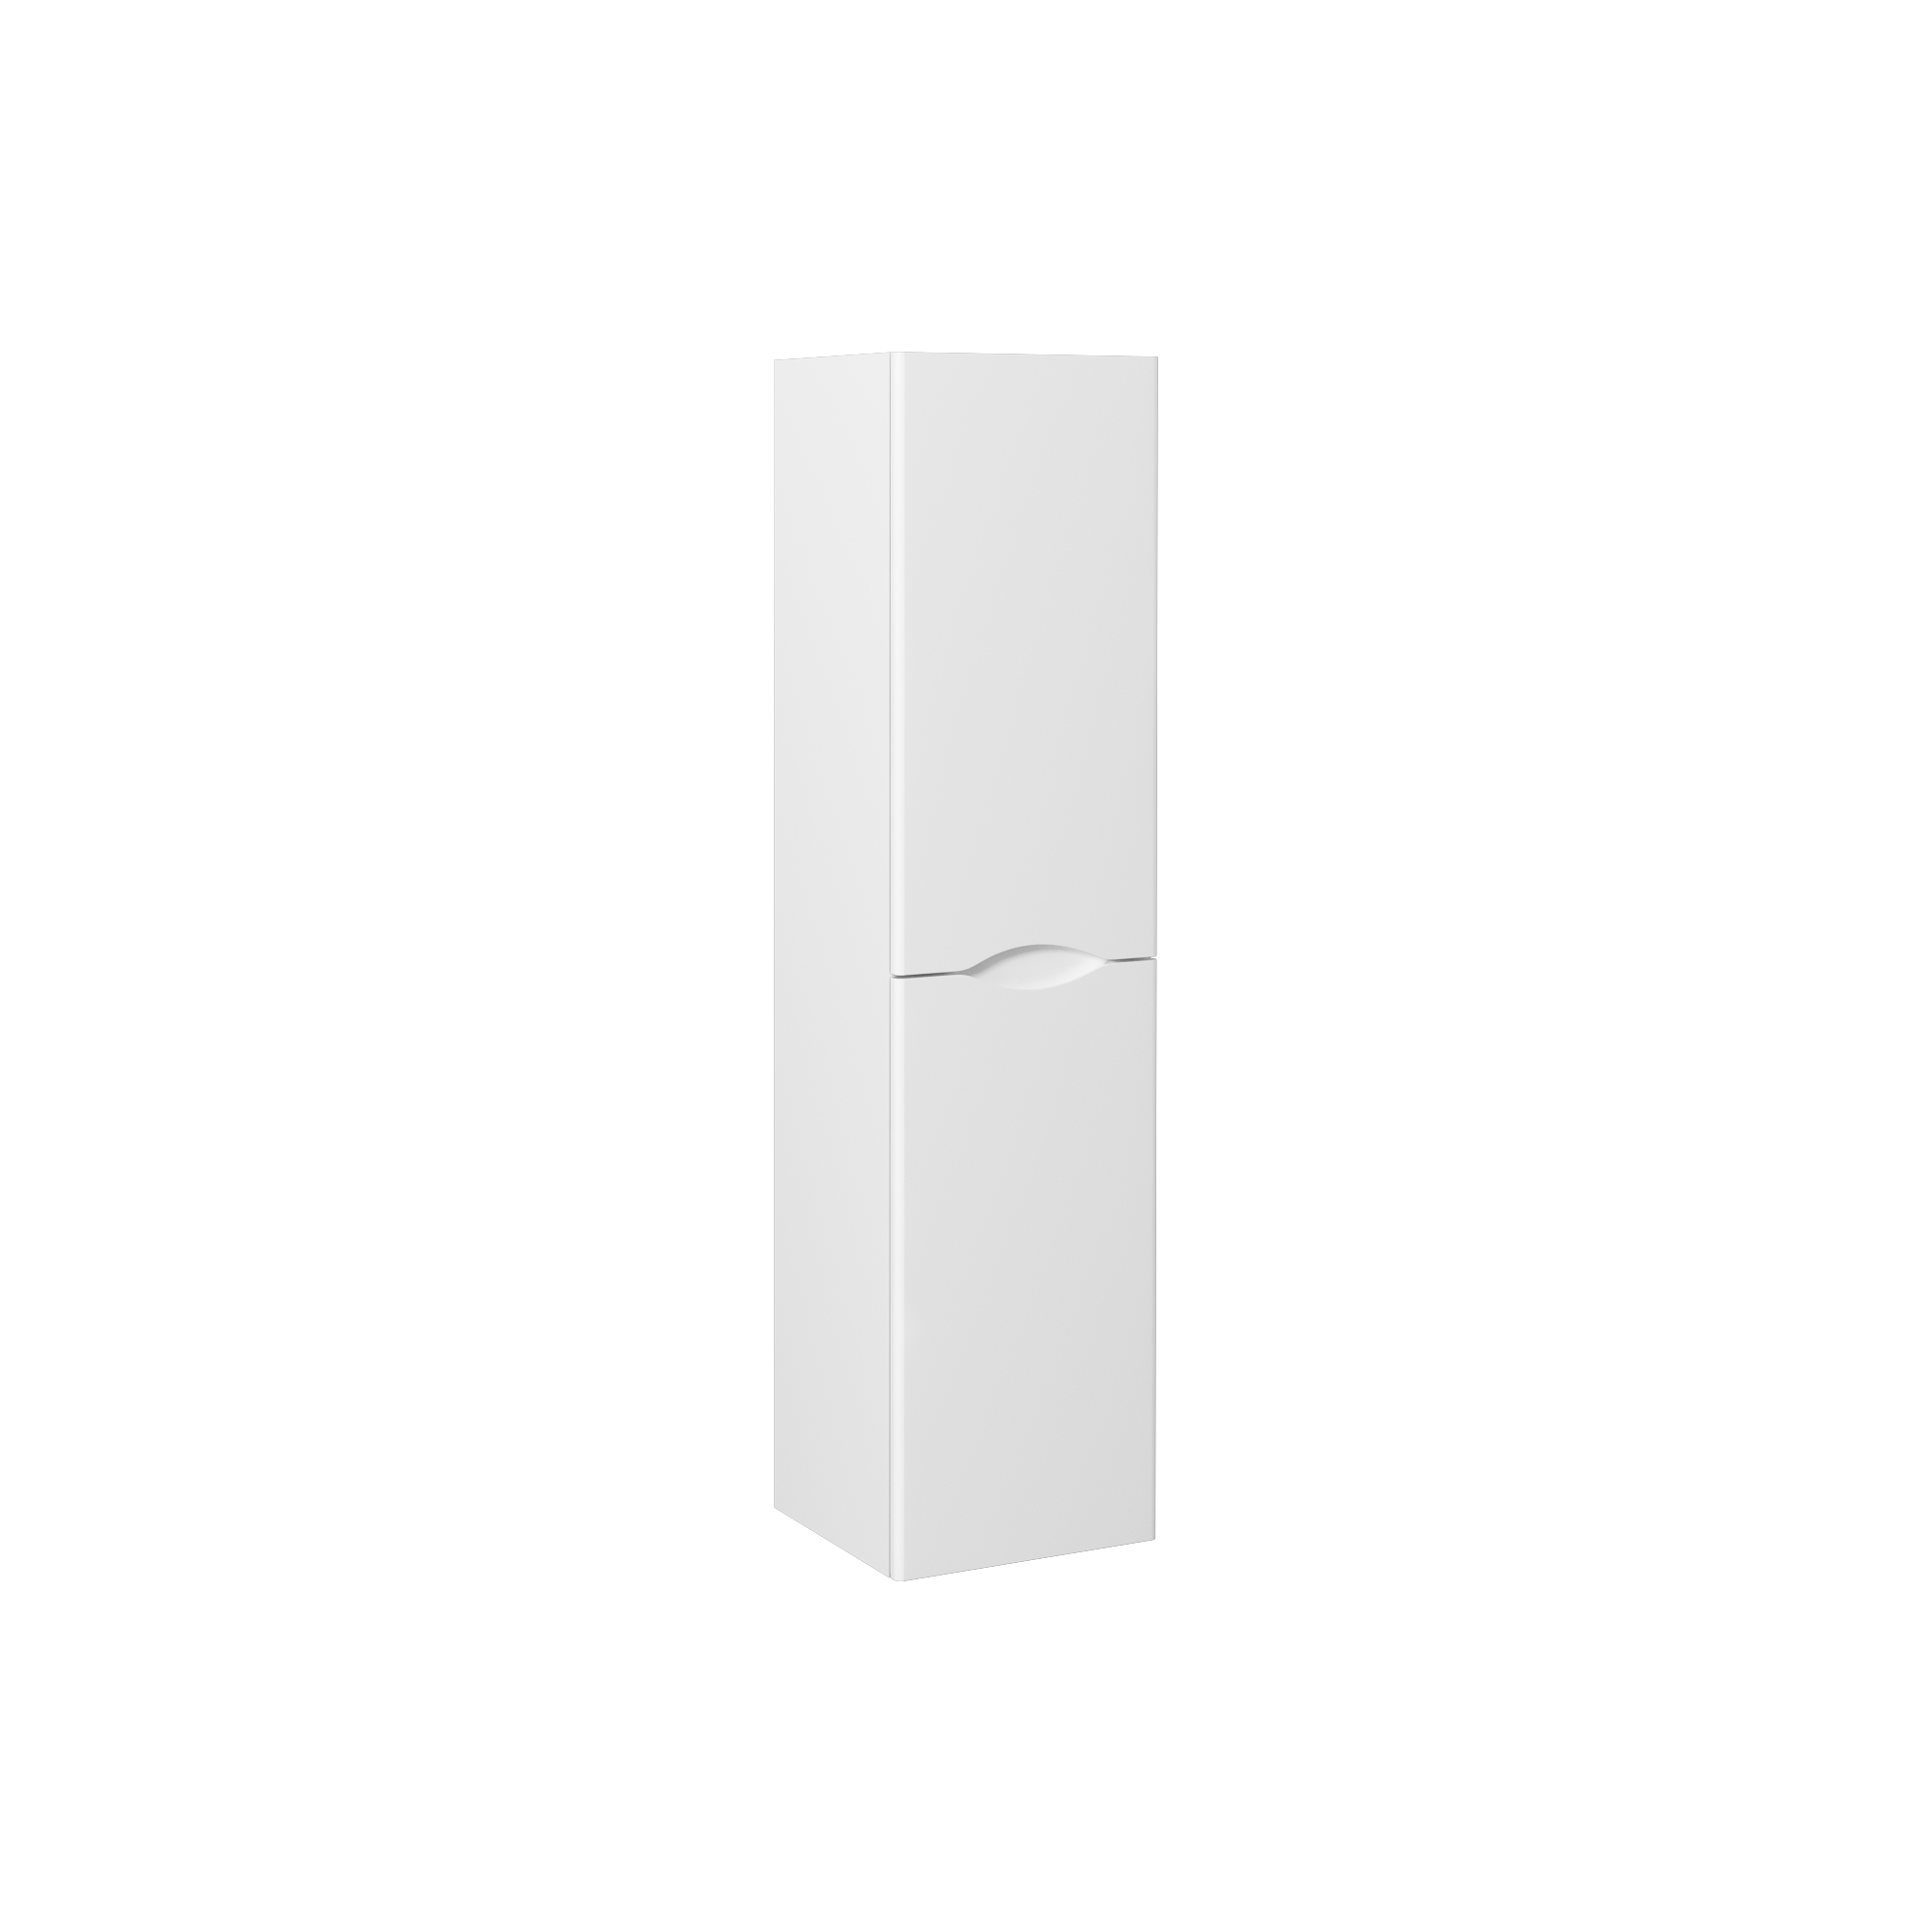 Neo 35 cm Tall Cabinet, Grey Right